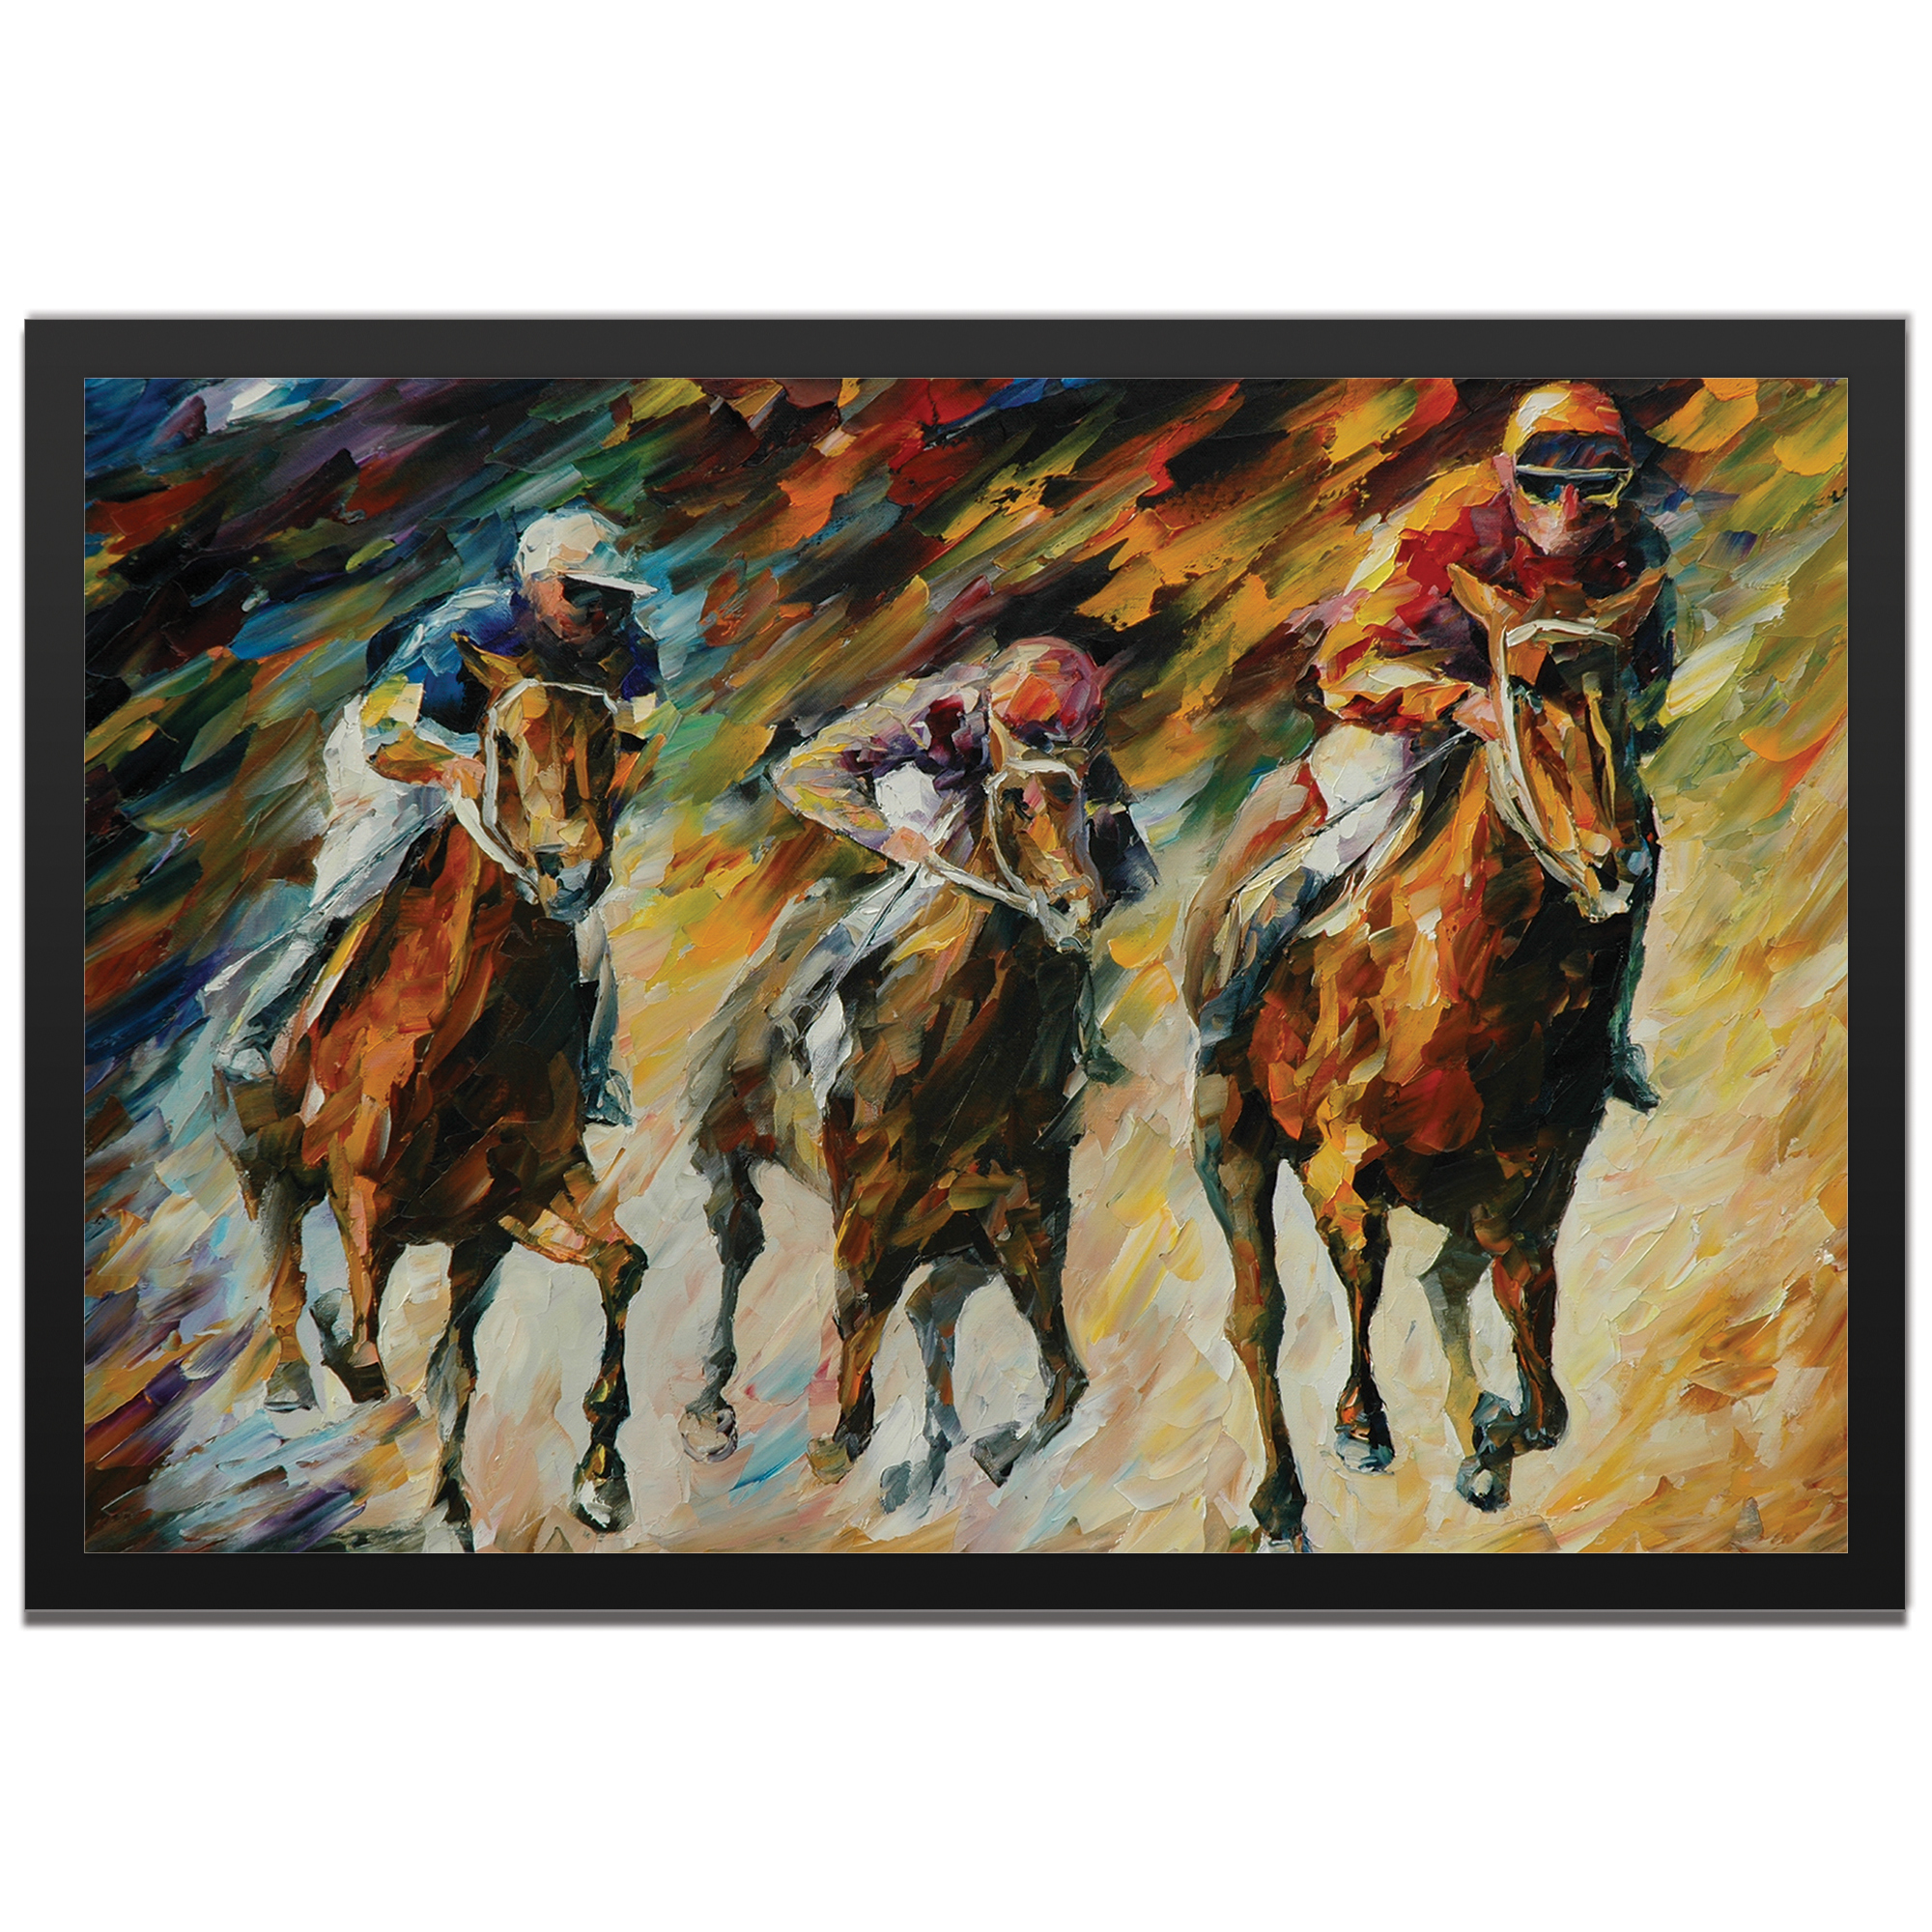 Leonid Afremov 'Instant of Success Framed' 32in x 22in Contemporary Horse Racing Art on Colored Metal